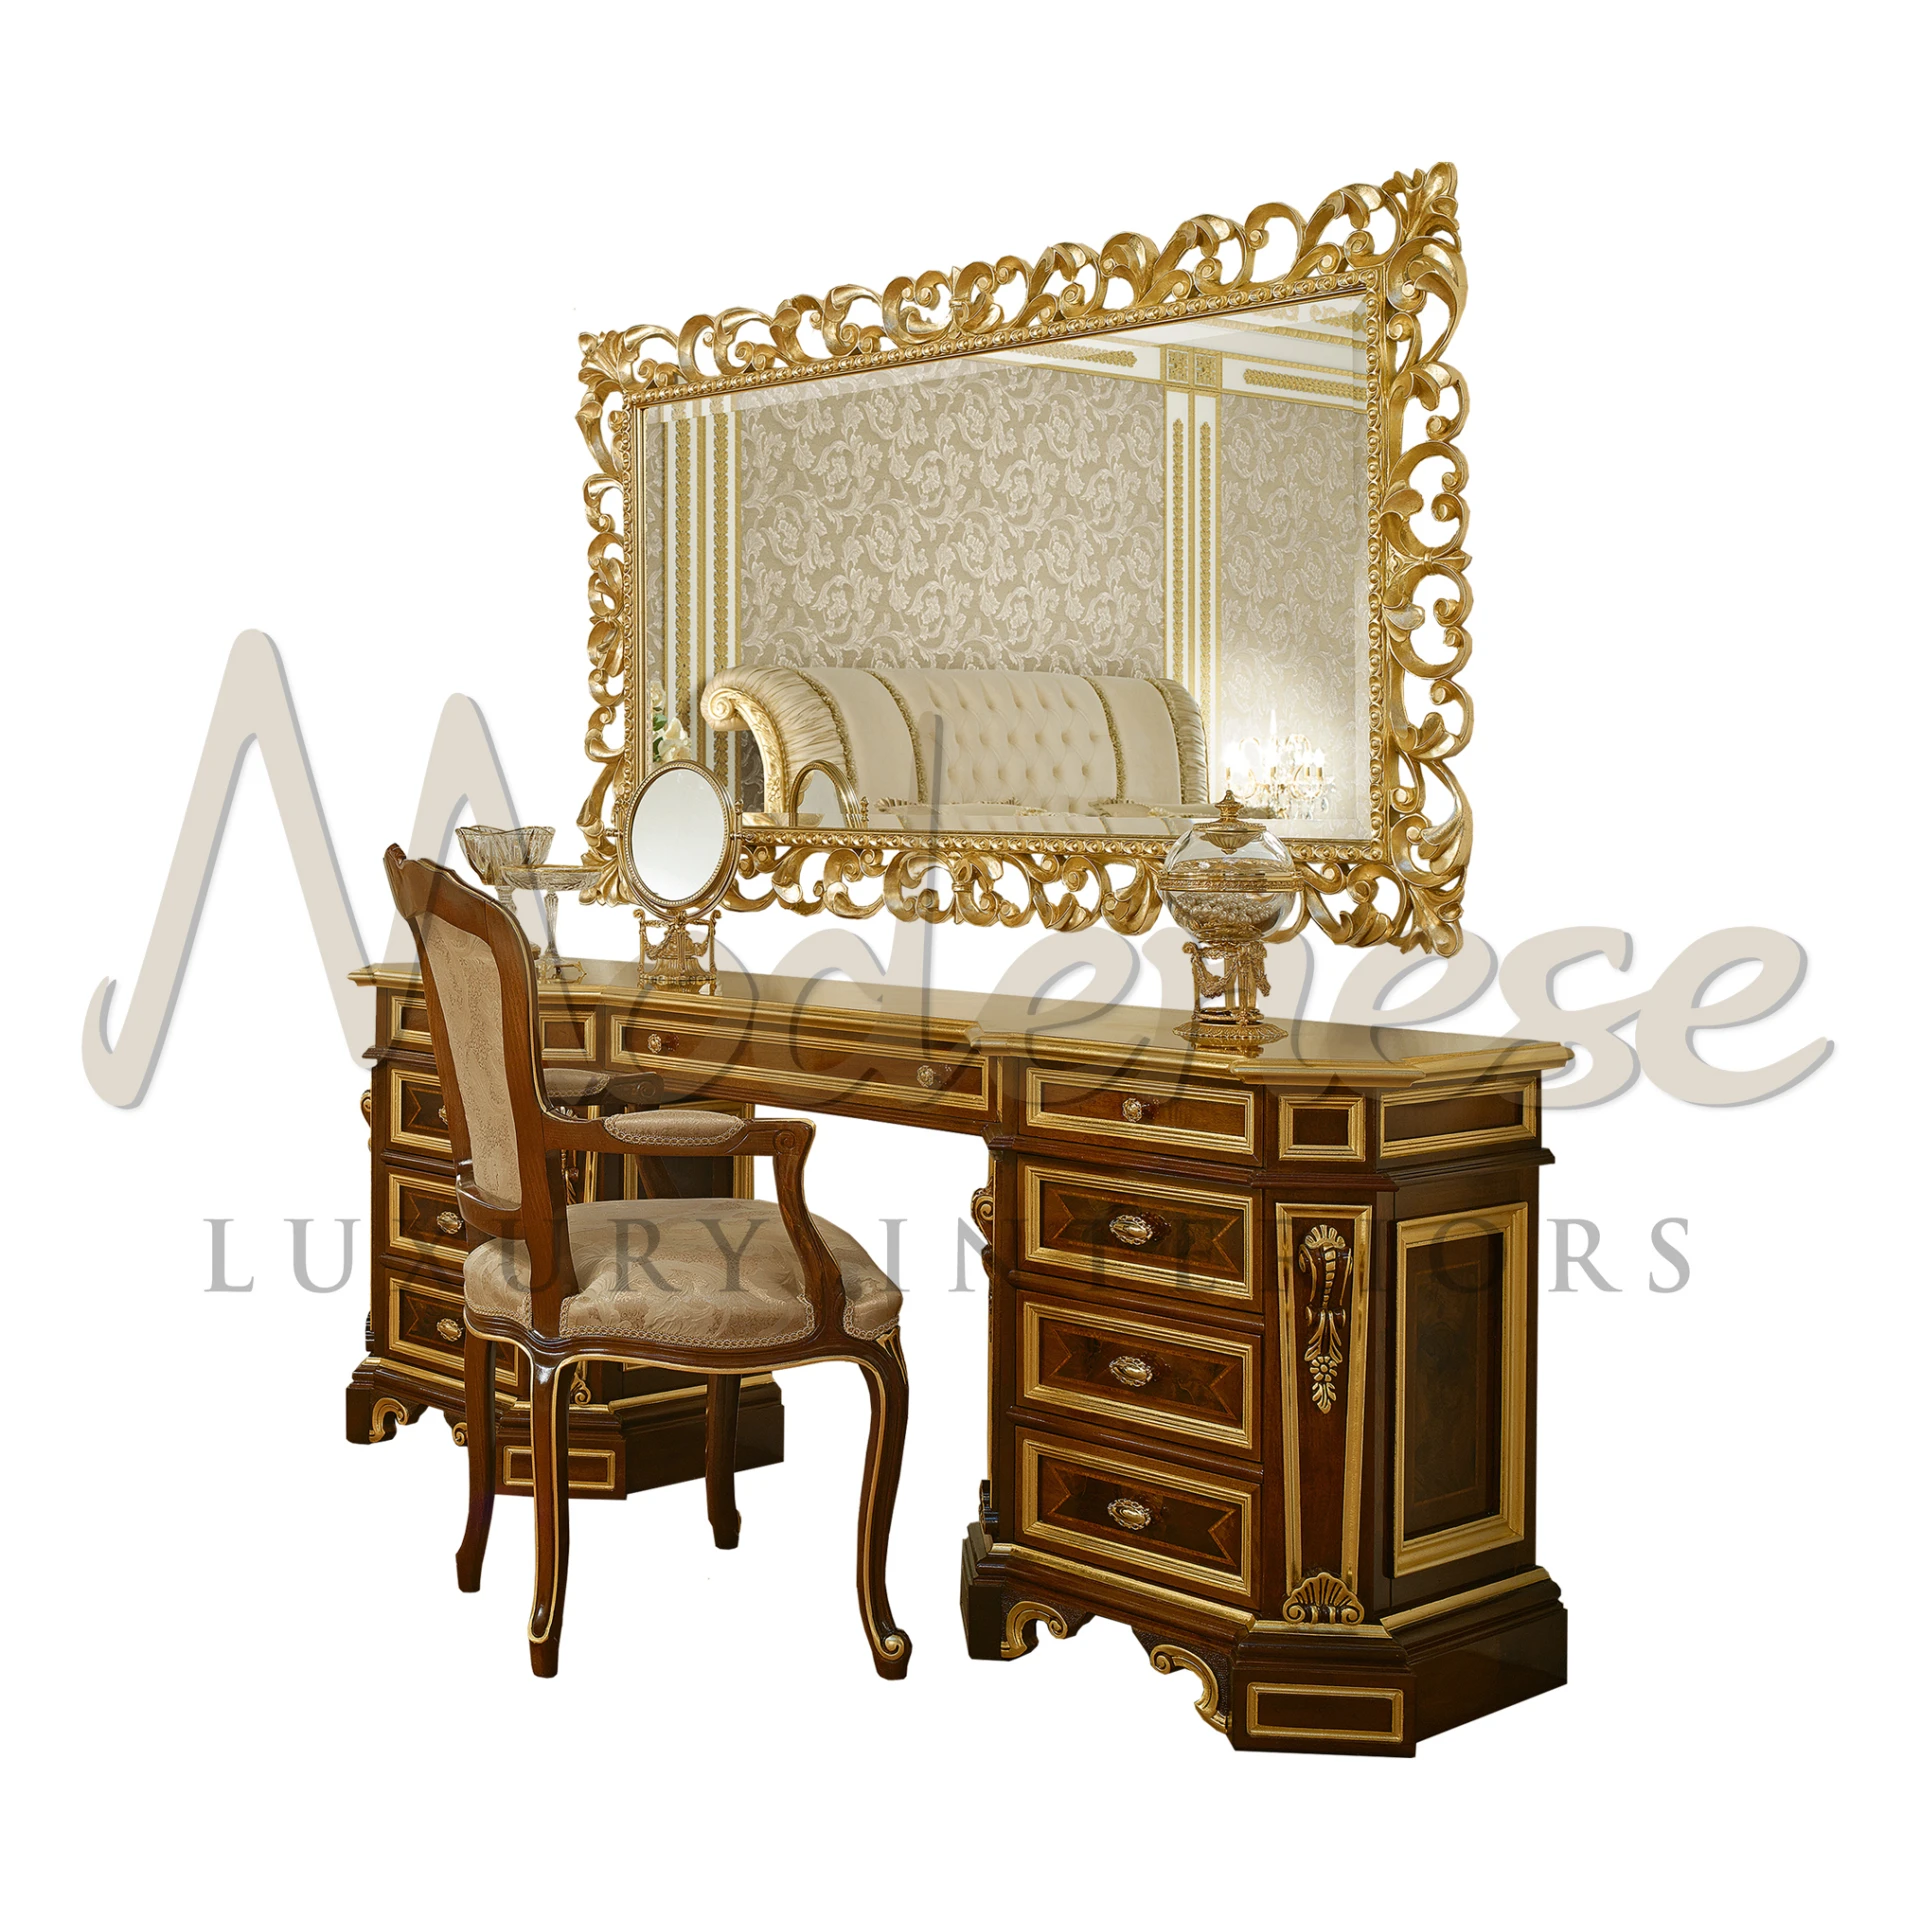 Regal dressing table with a rich golden finish, showcasing ornate carvings, a large embellished mirror, and a matching armchair with upholstered seat.